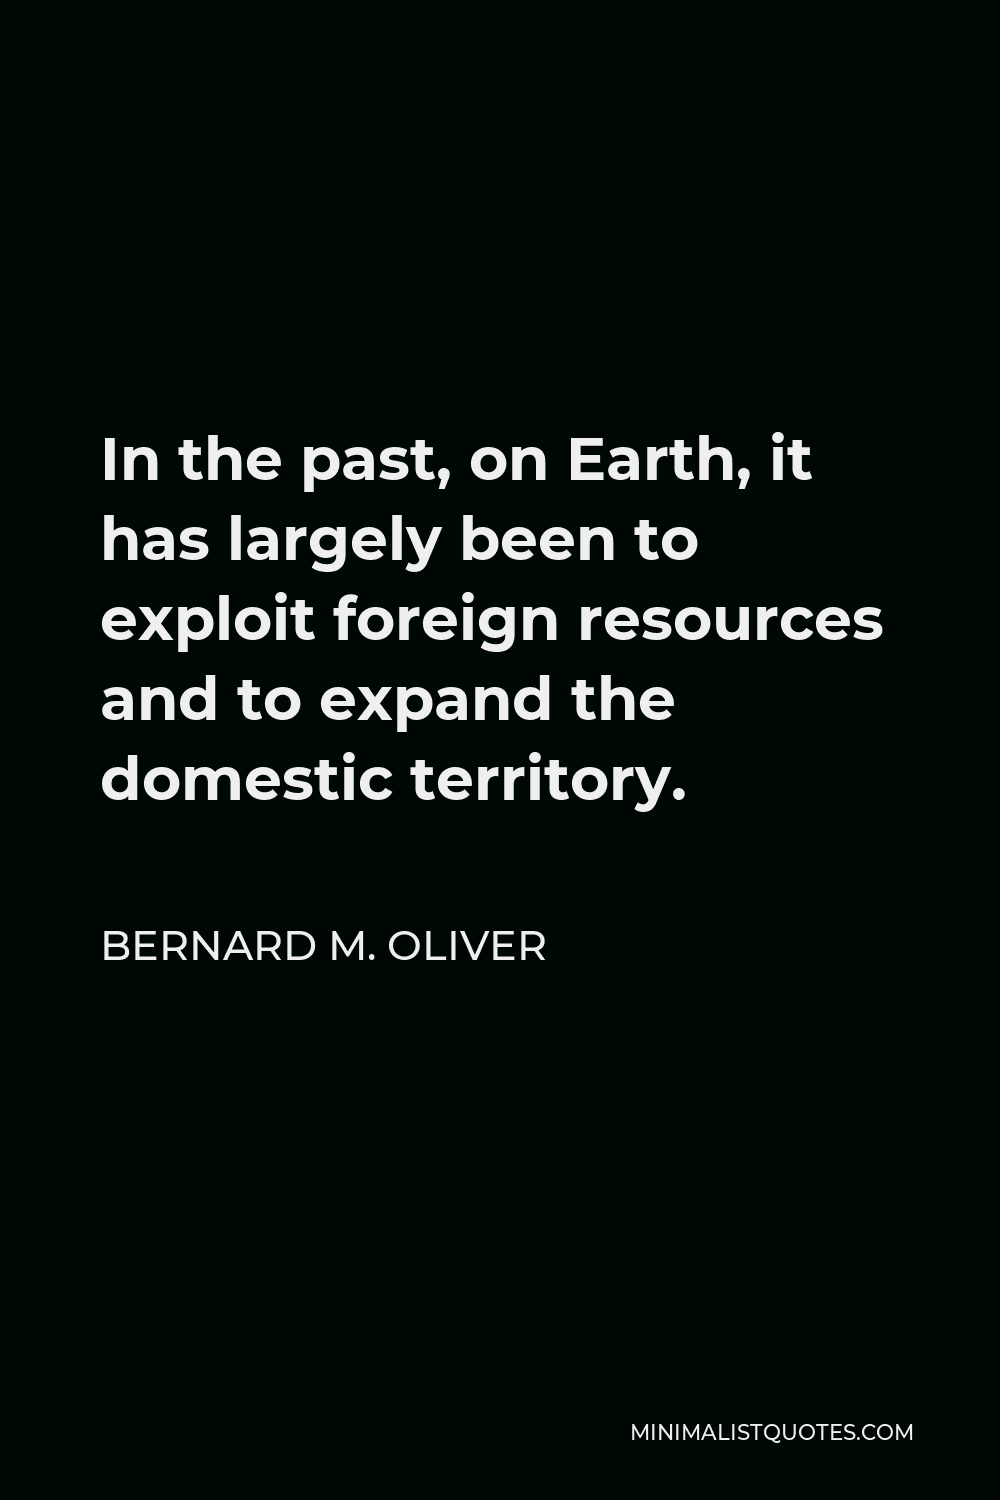 Bernard M. Oliver Quote - In the past, on Earth, it has largely been to exploit foreign resources and to expand the domestic territory.